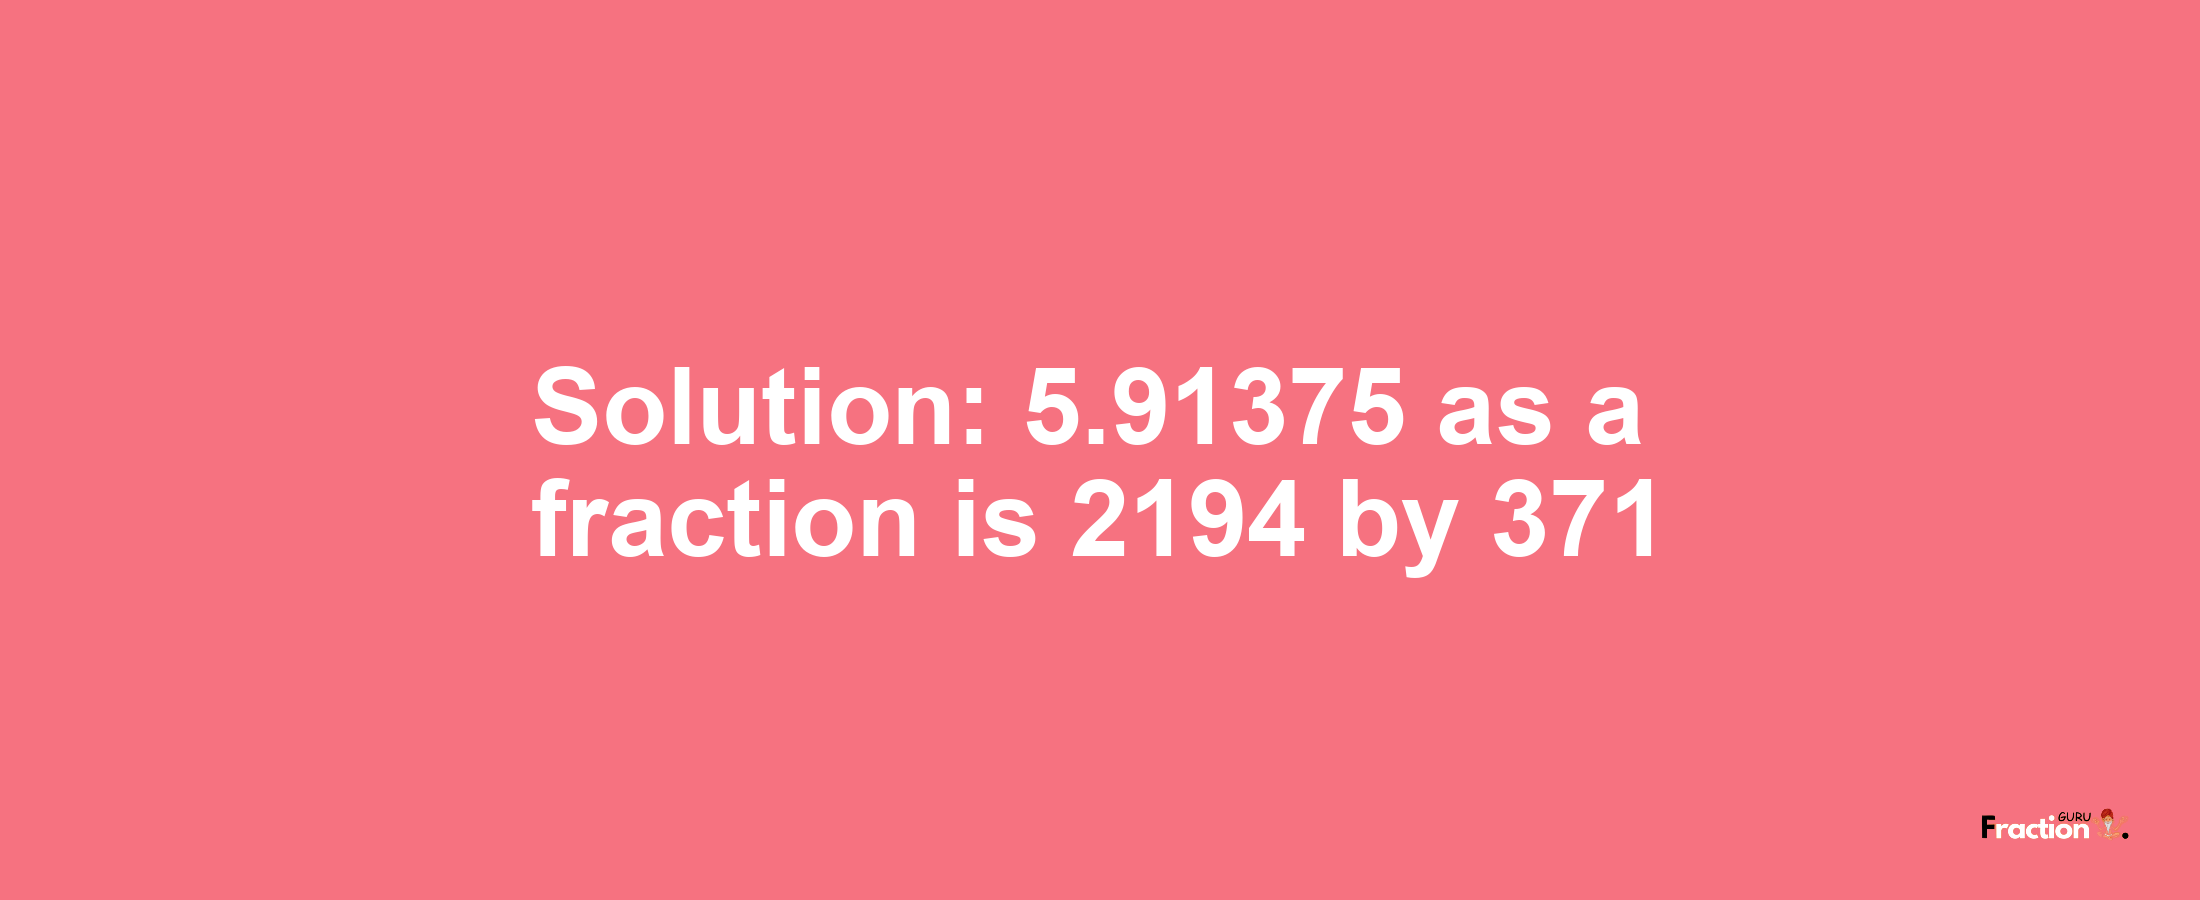 Solution:5.91375 as a fraction is 2194/371